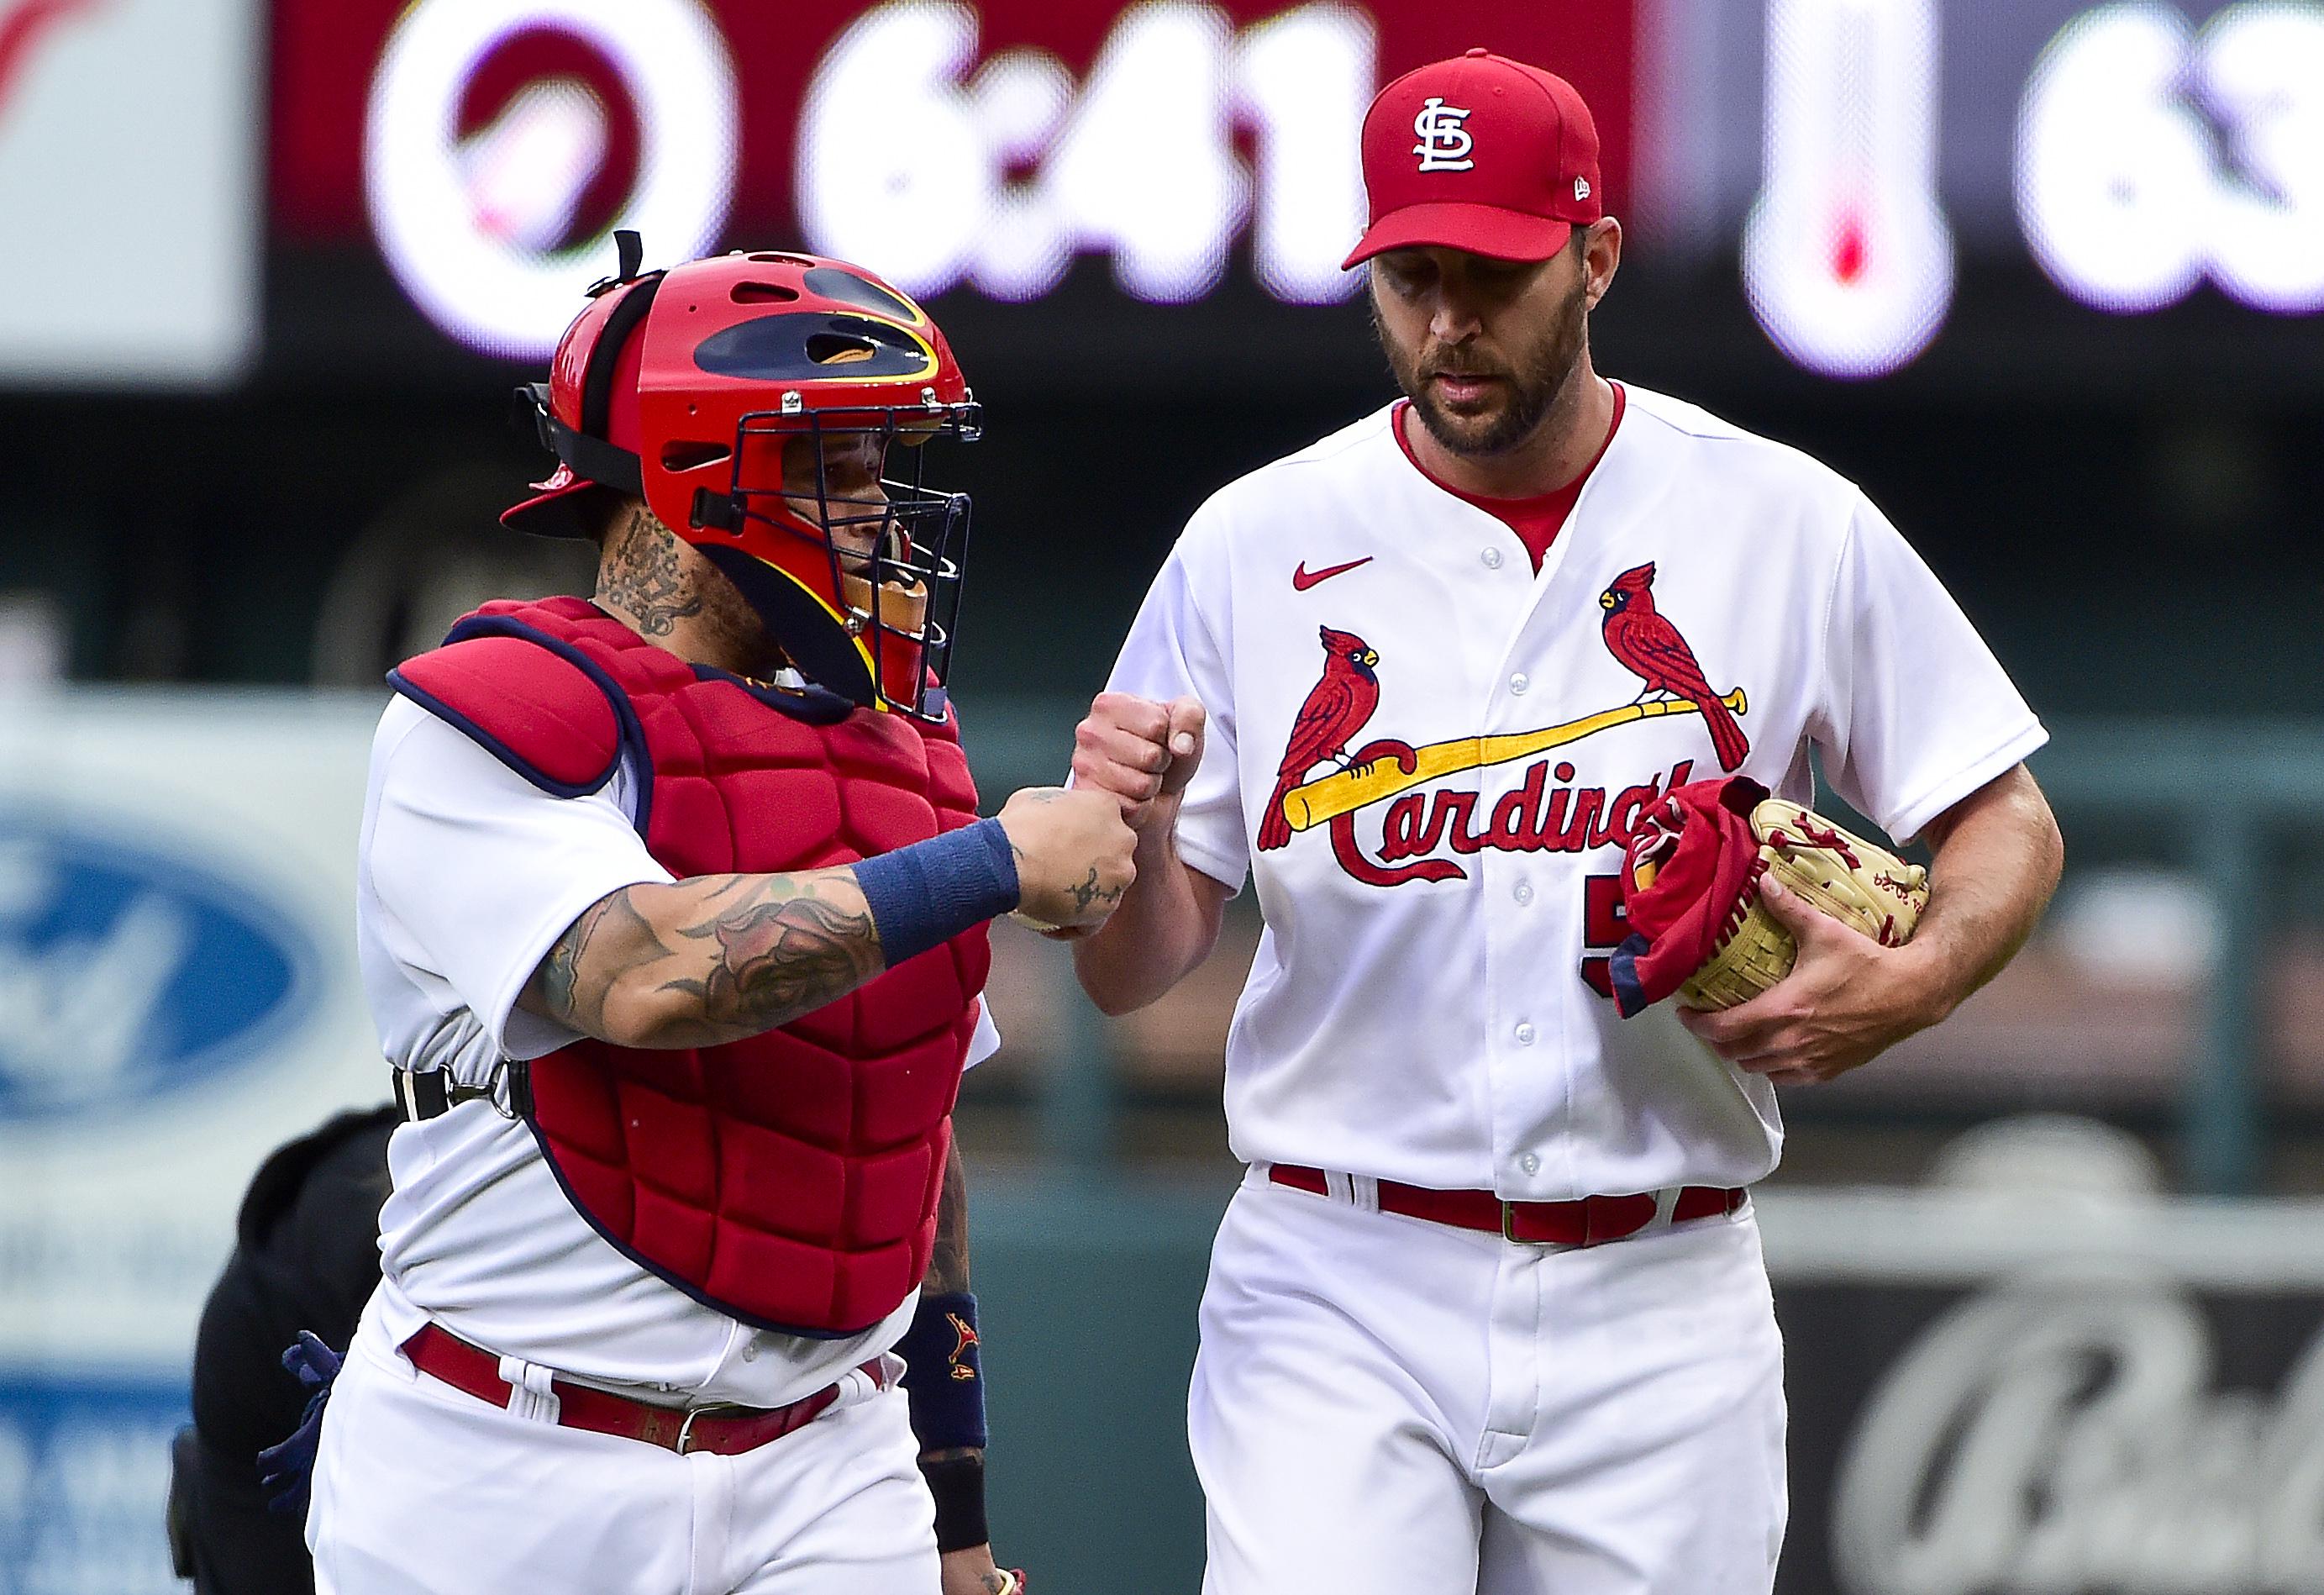 Adam Wainwright and Yadier Molina's New Budweiser Commercial Will Melt Your Heart